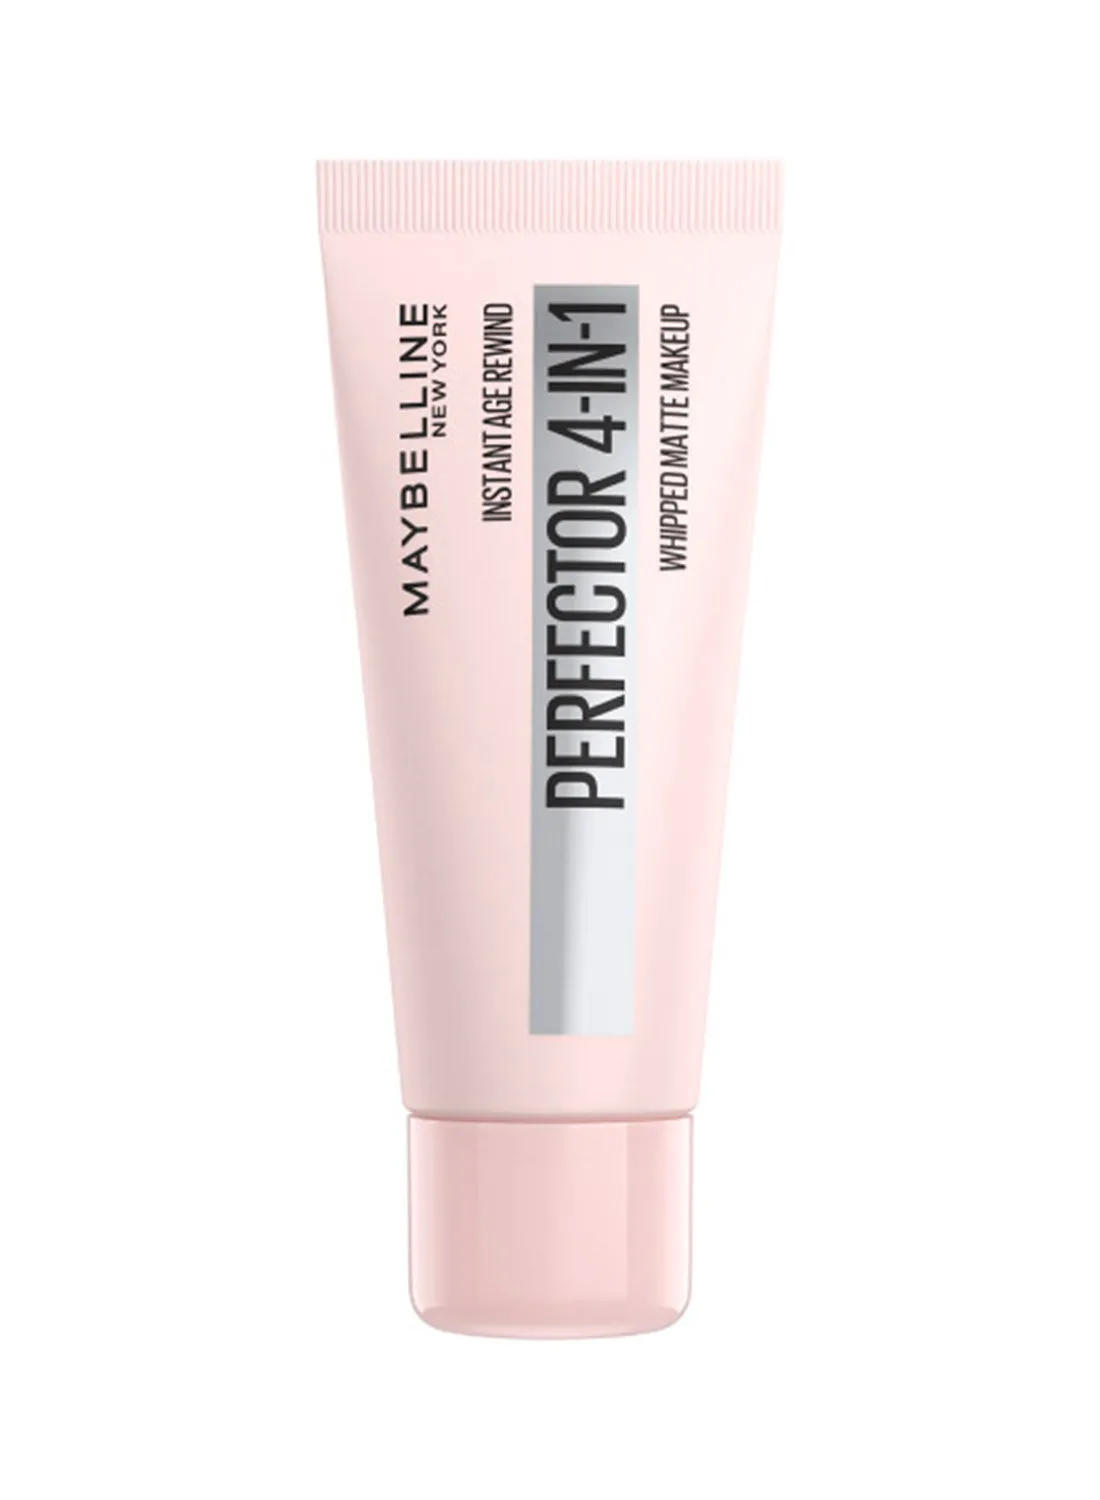 MAYBELLINE NEW YORK Instant anti Age Perfector 4-In-1 whipped Matte Makeup - 03 Medium Moyenne